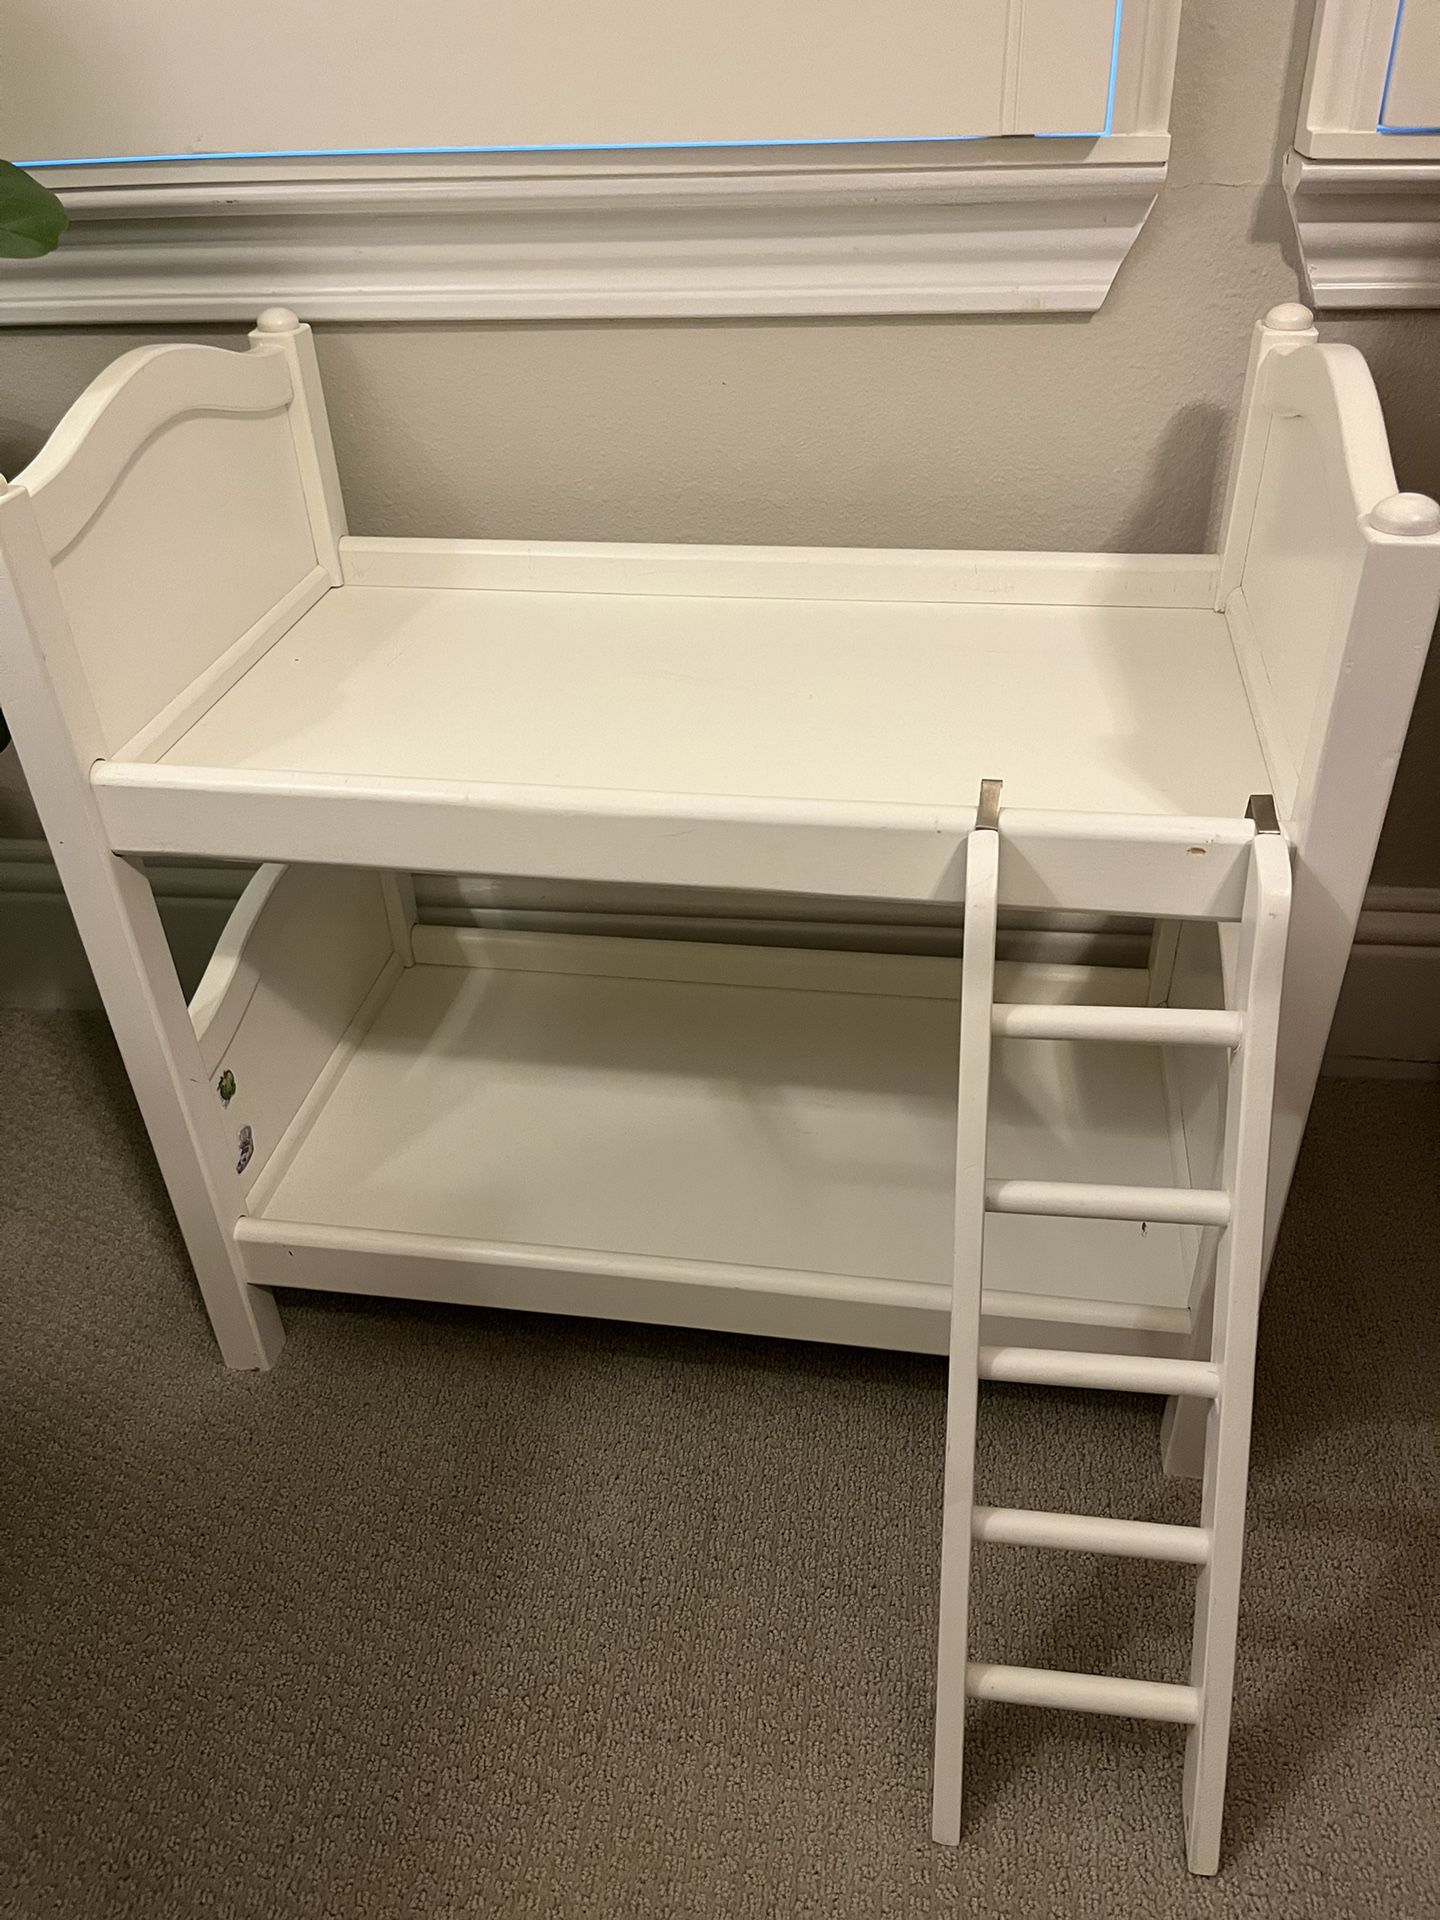 Wood Bunk Bed For American Girl Size Doll